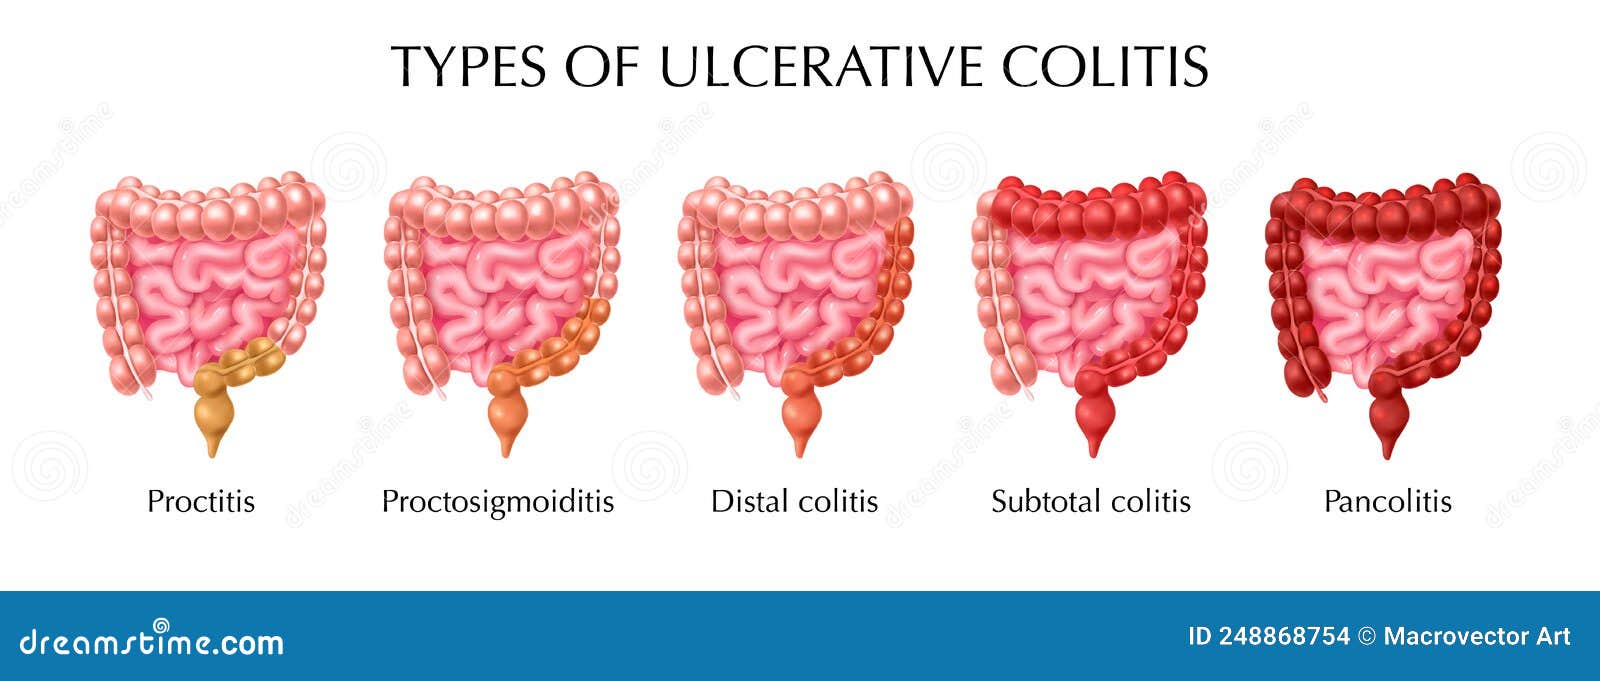 ulcerative colitis types infographics